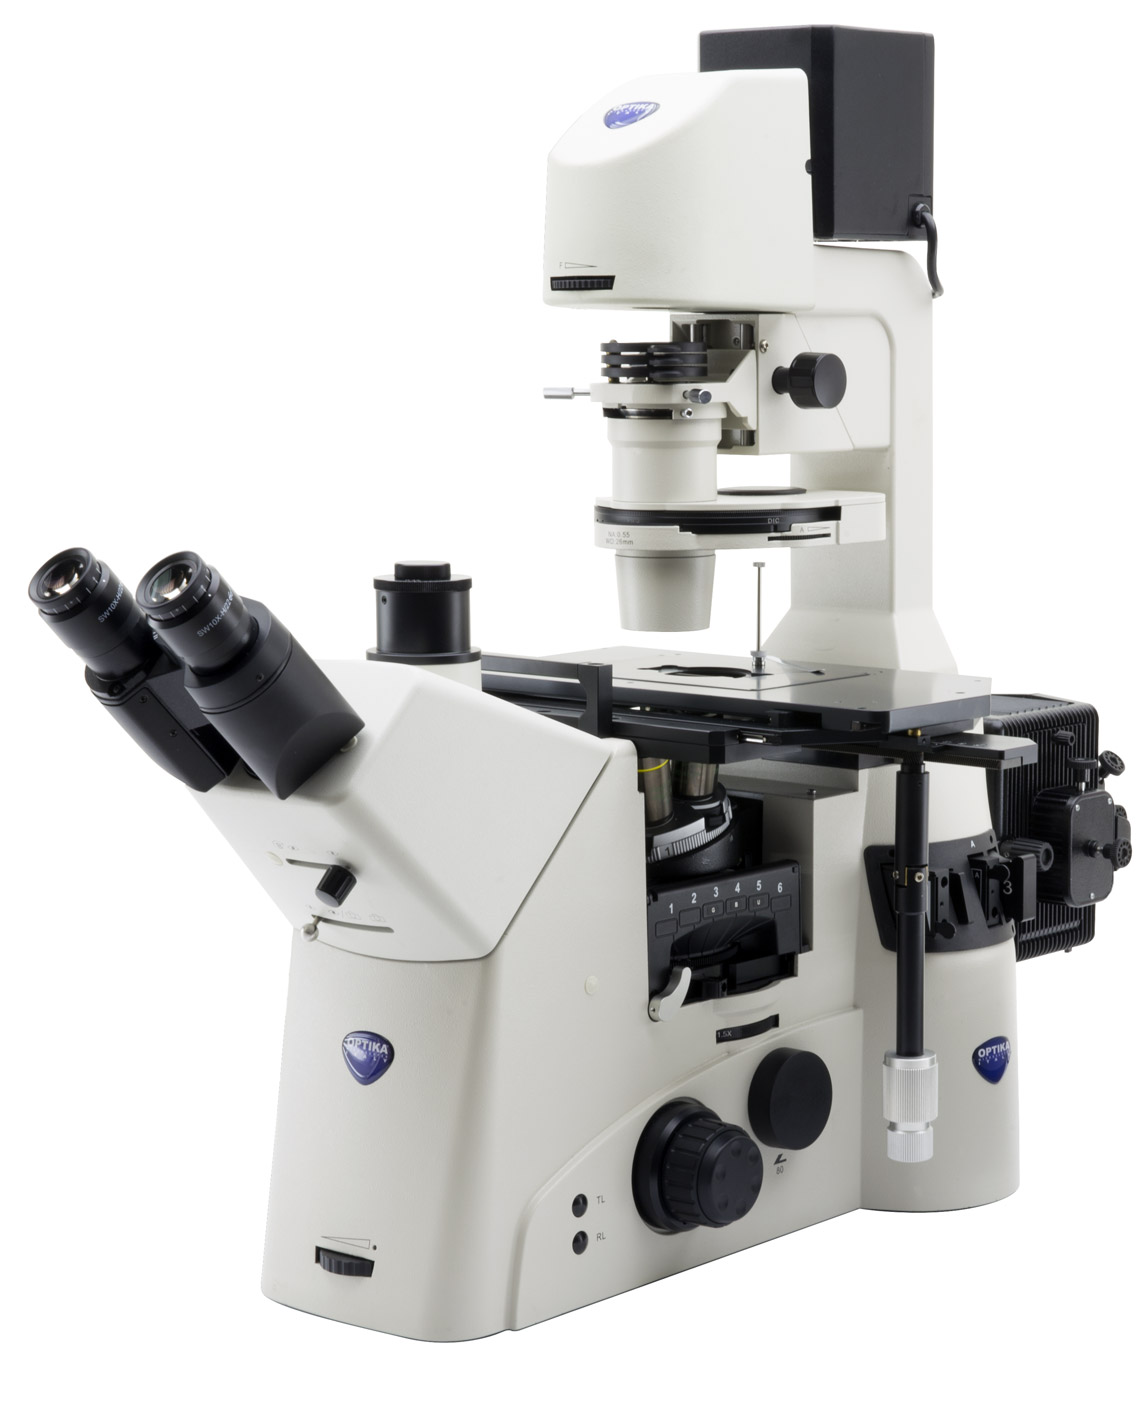 carl zeiss microscope models structural